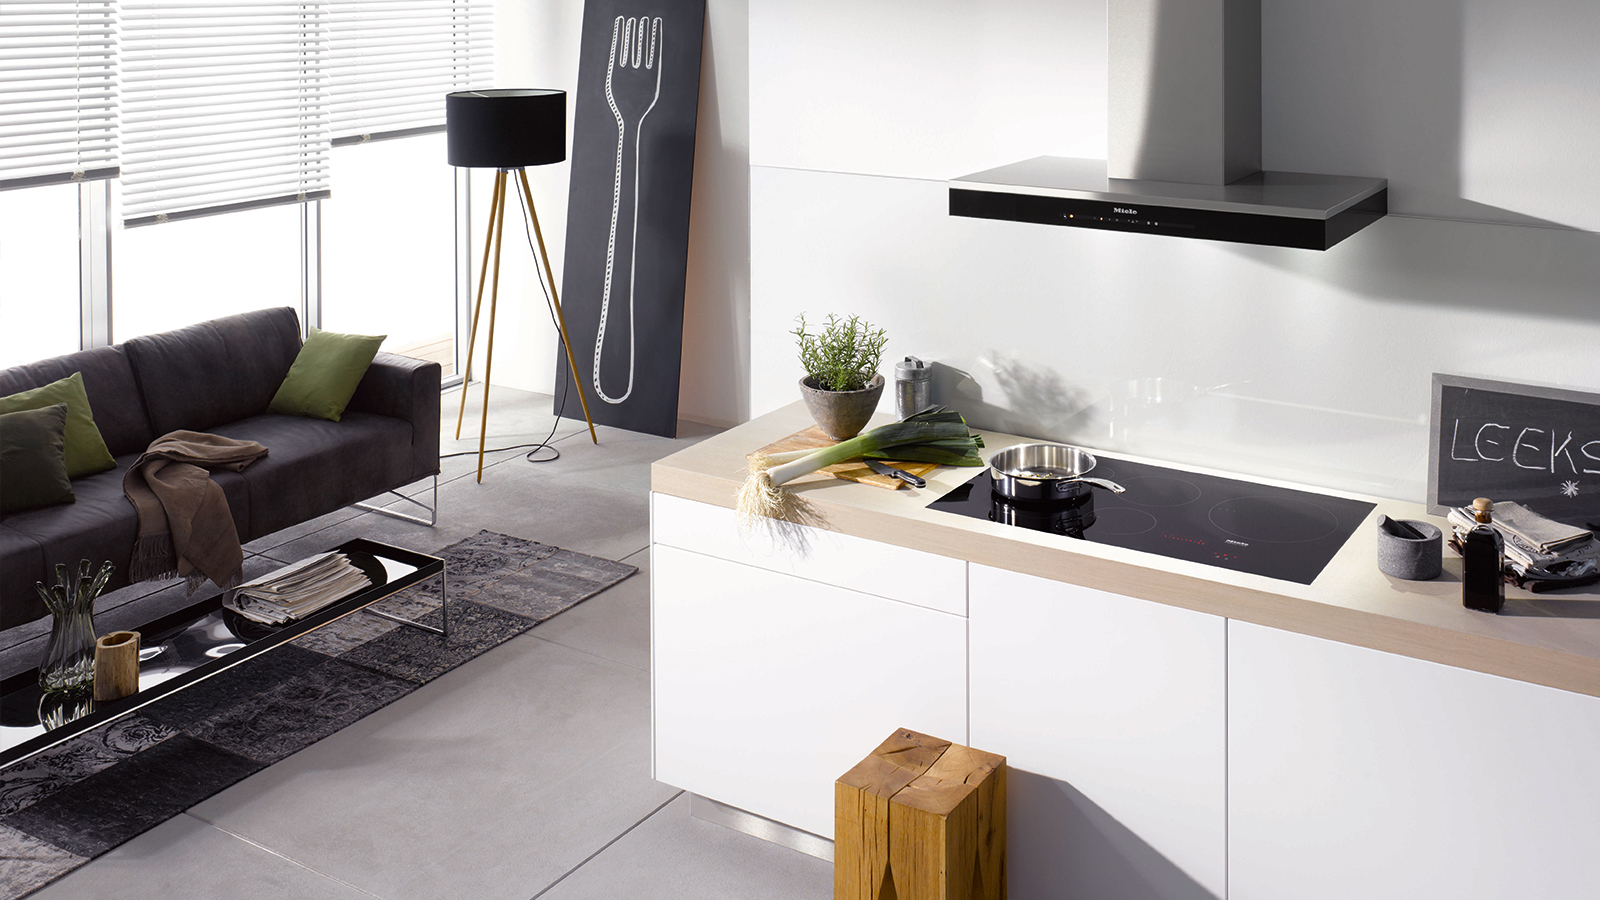 Design Inspiration, Featuring Miele